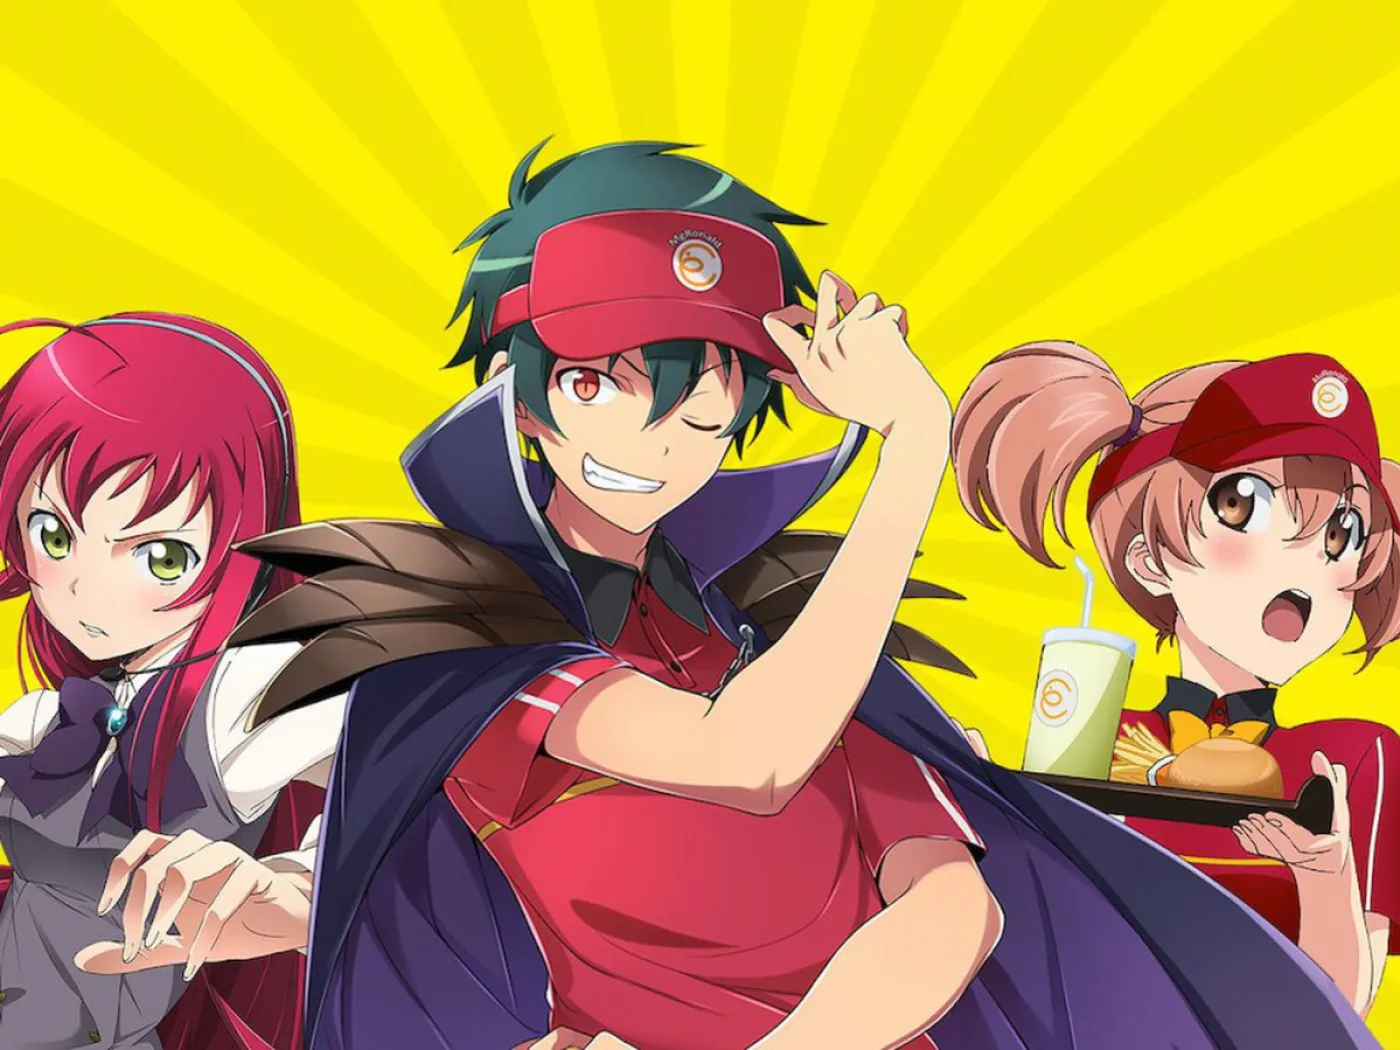 Characters from The Devil Is a Part-Timer